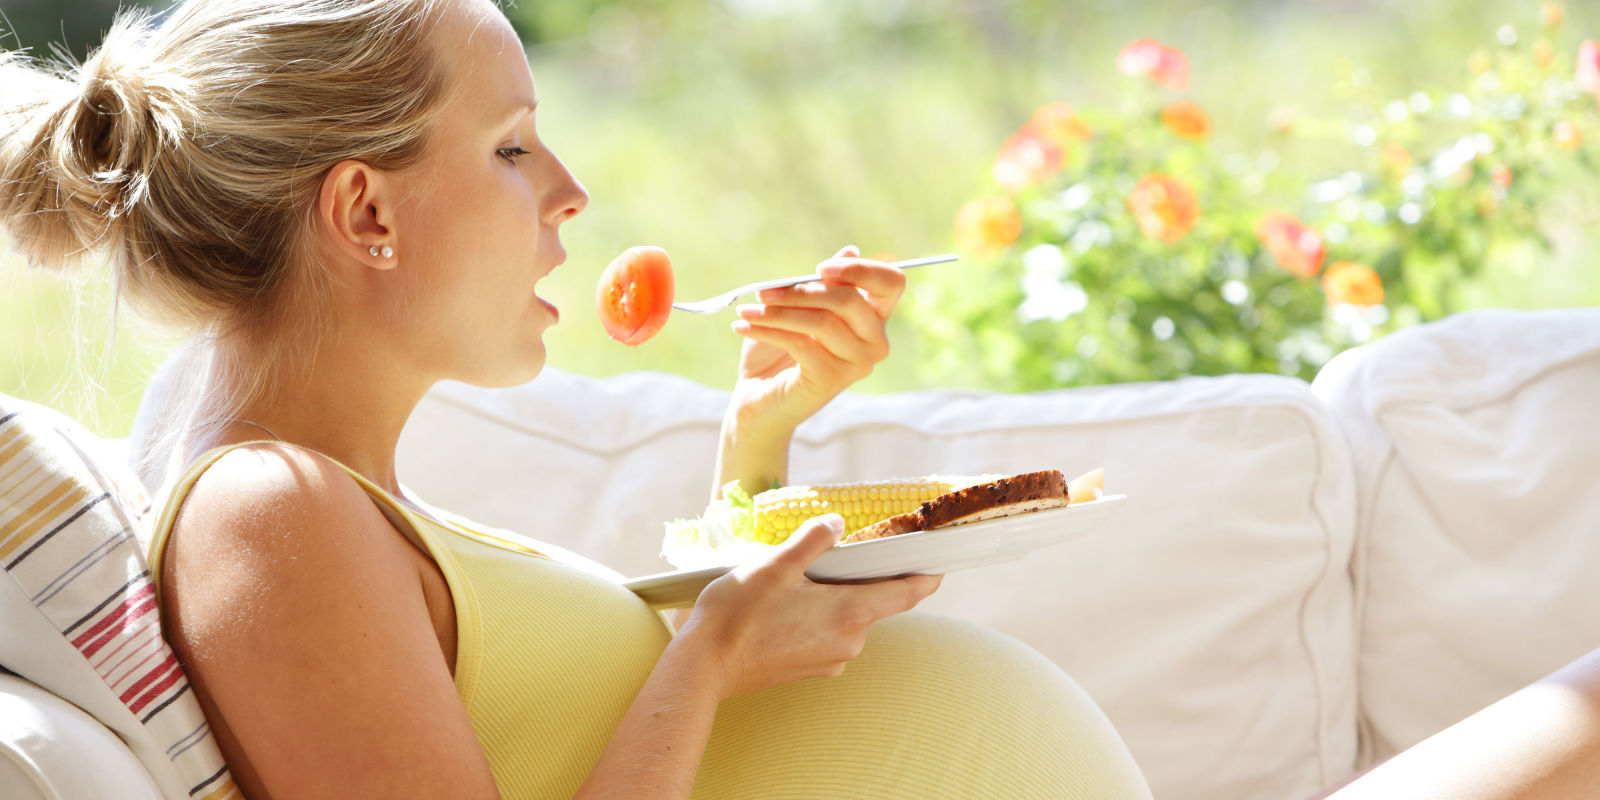 Pregnancy and nutrition – What to eat and what to avoid